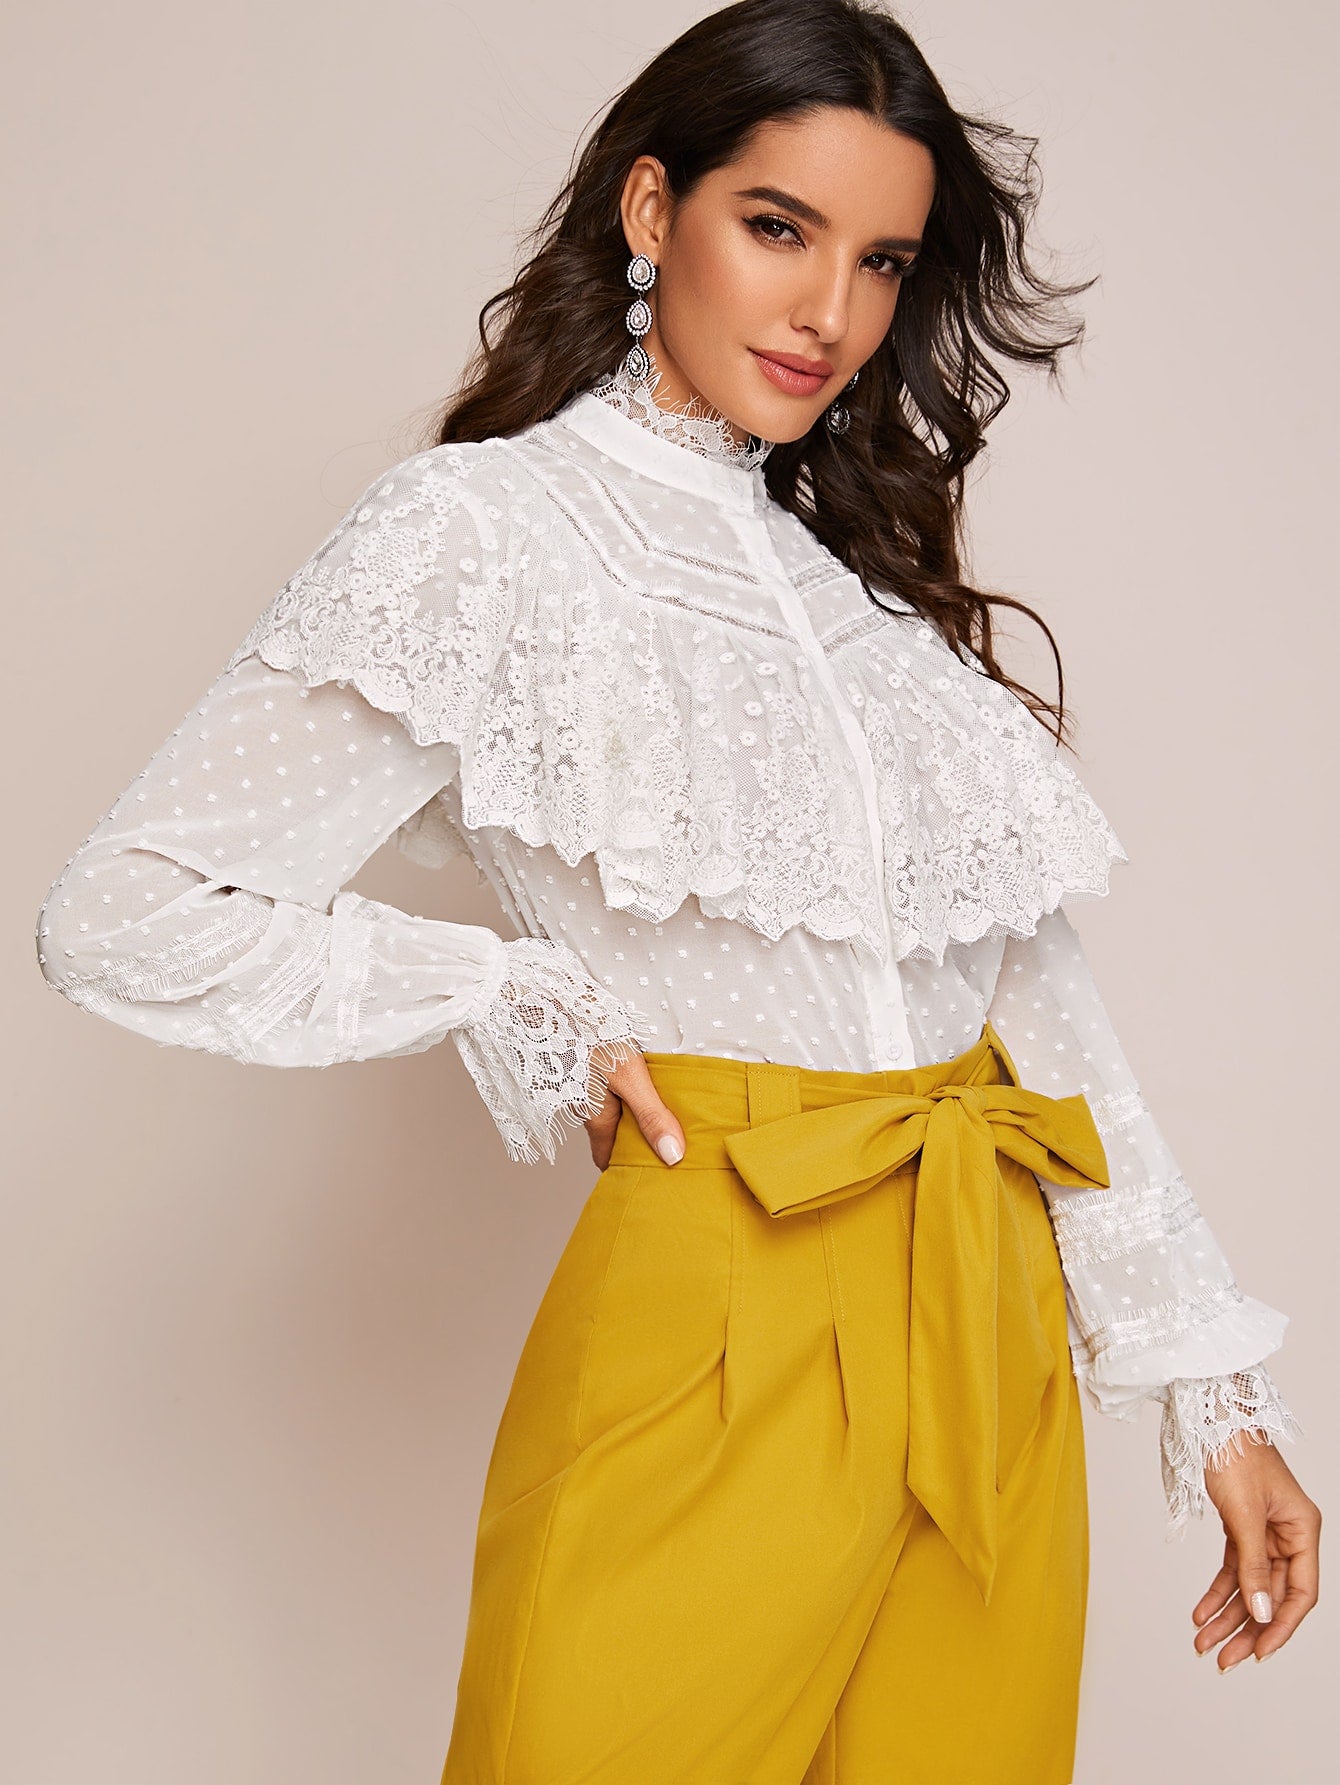 Eyelash Lace and Embroidered Mesh Panel Blouse